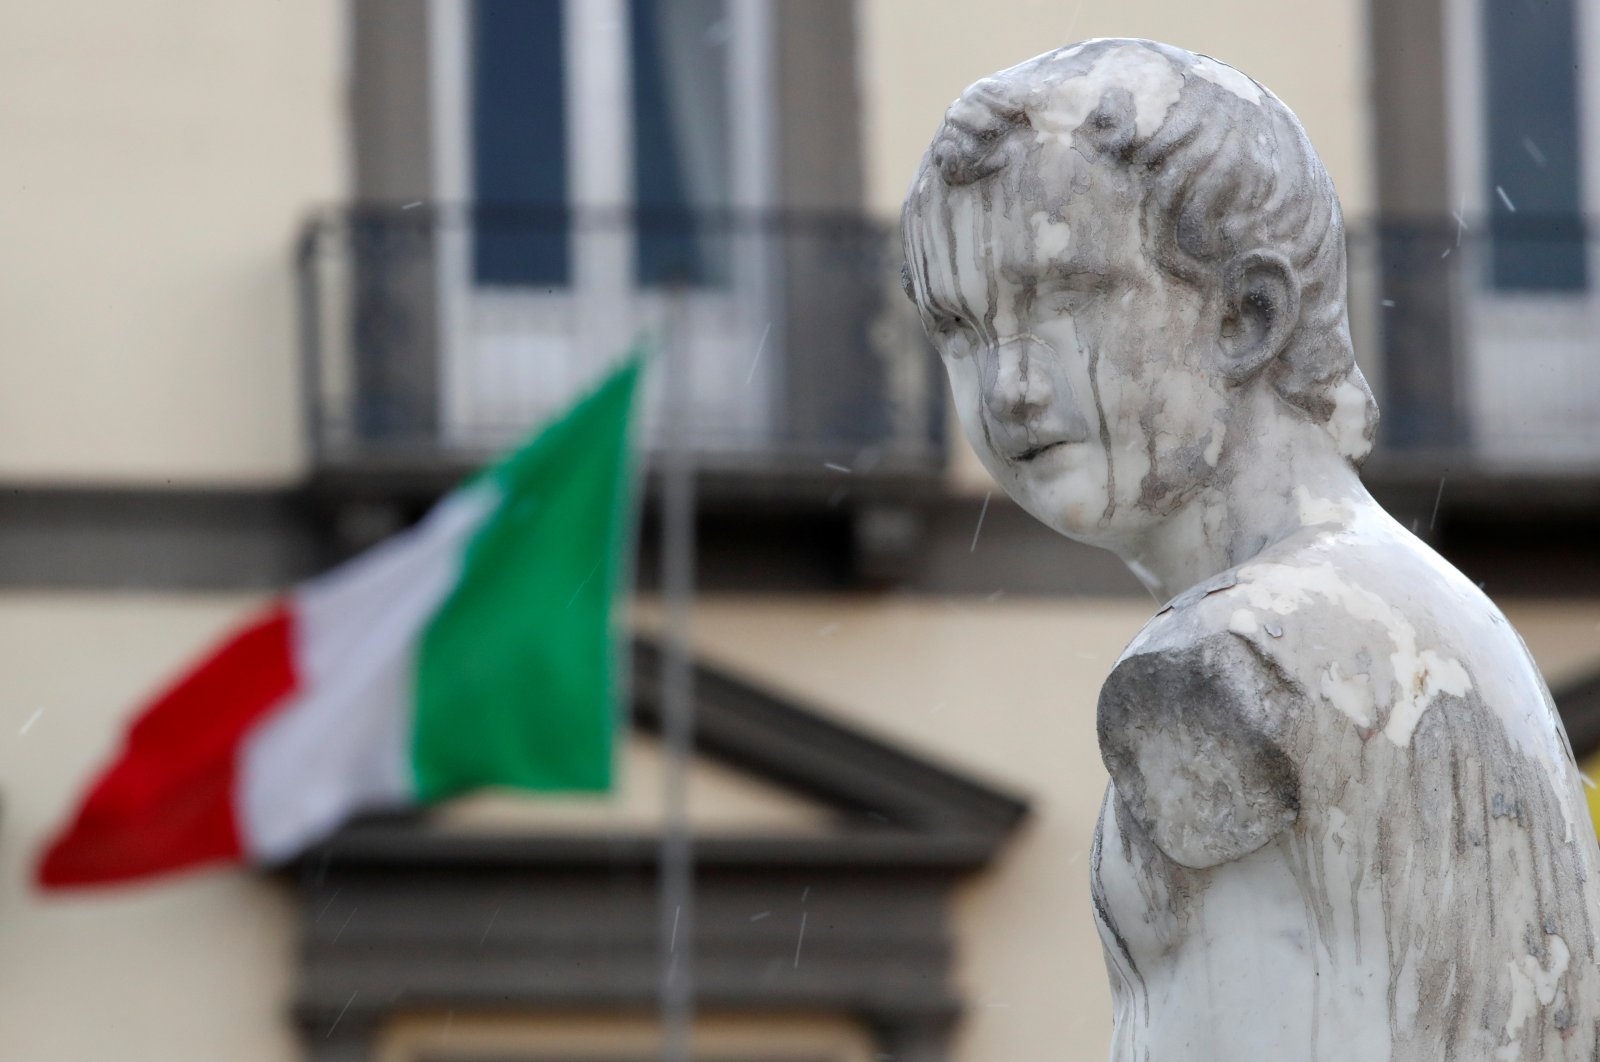 A statue on the Fountain of Neptune is seen in front of an Italian flag on Palm Sunday, following the coronavirus outbreak, in Naples, Italy, Sunday, April 5, 2020. (Reuters Photo)